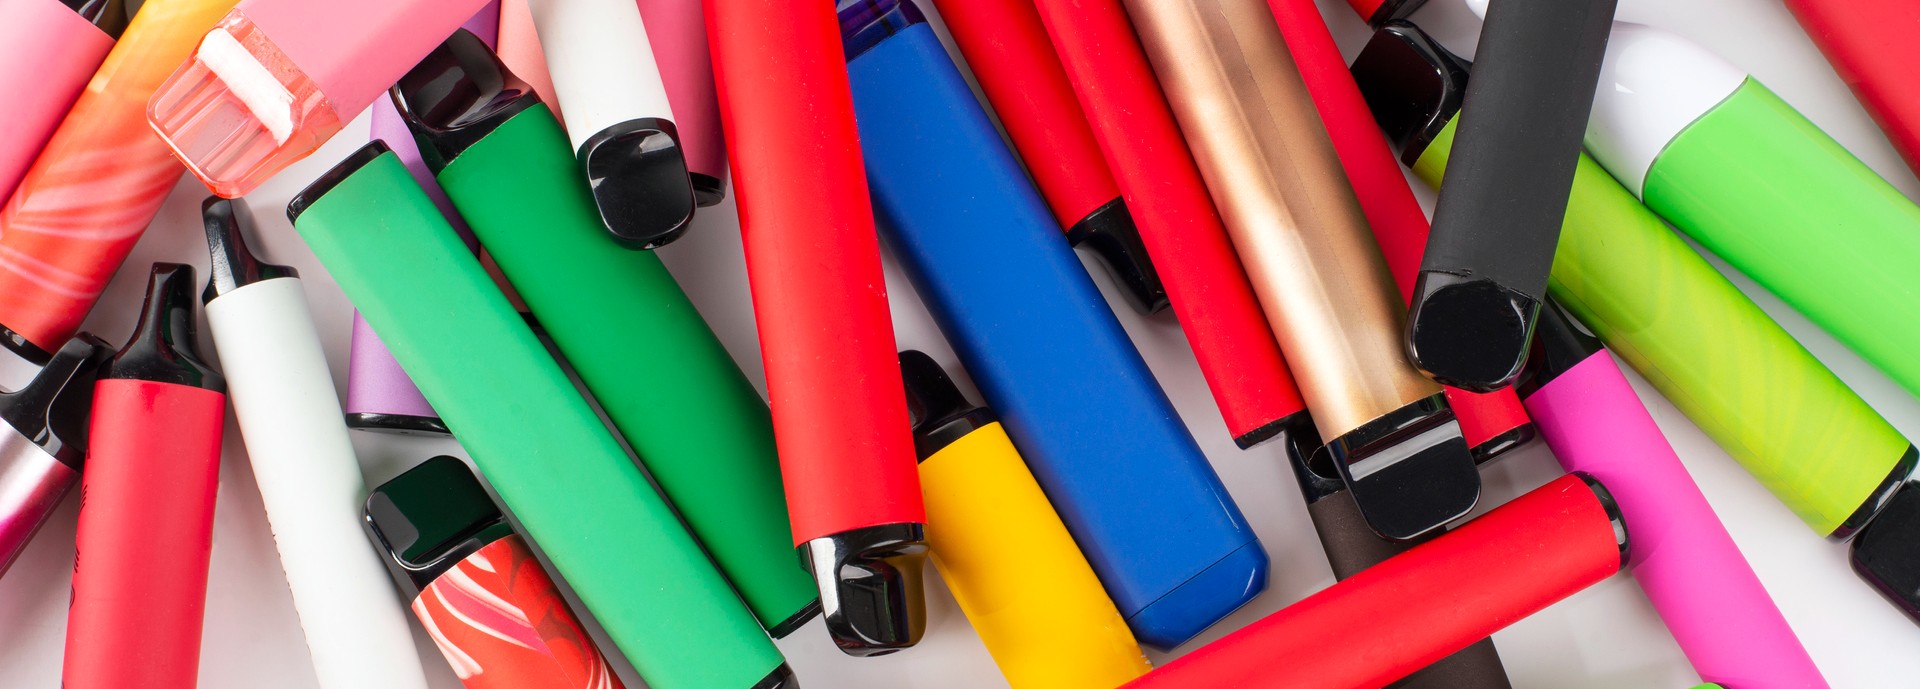 A pile of brightly coloured e-cigarettes scattered across a surface